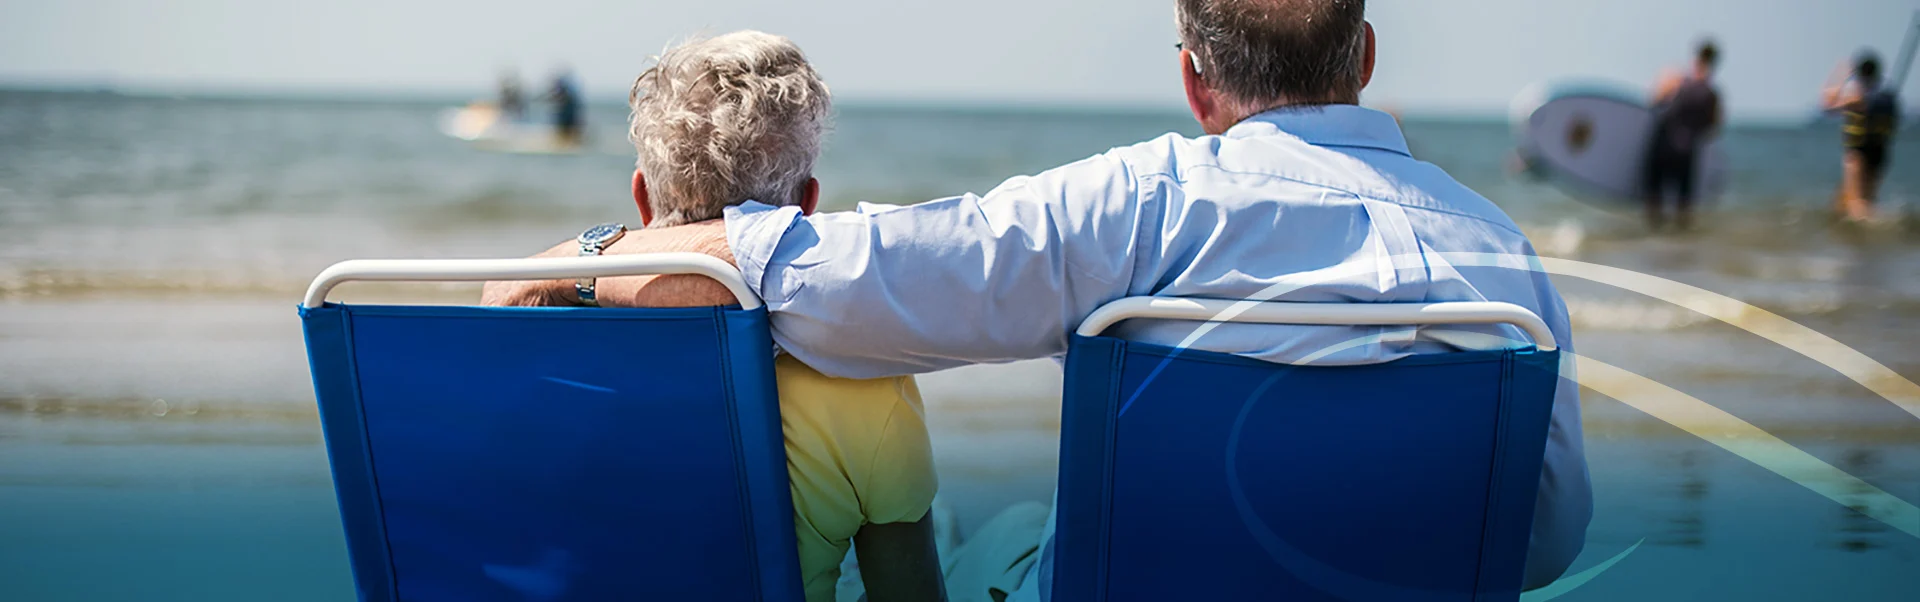 Retired Man and Woman Sitting on Beach Chairs Together